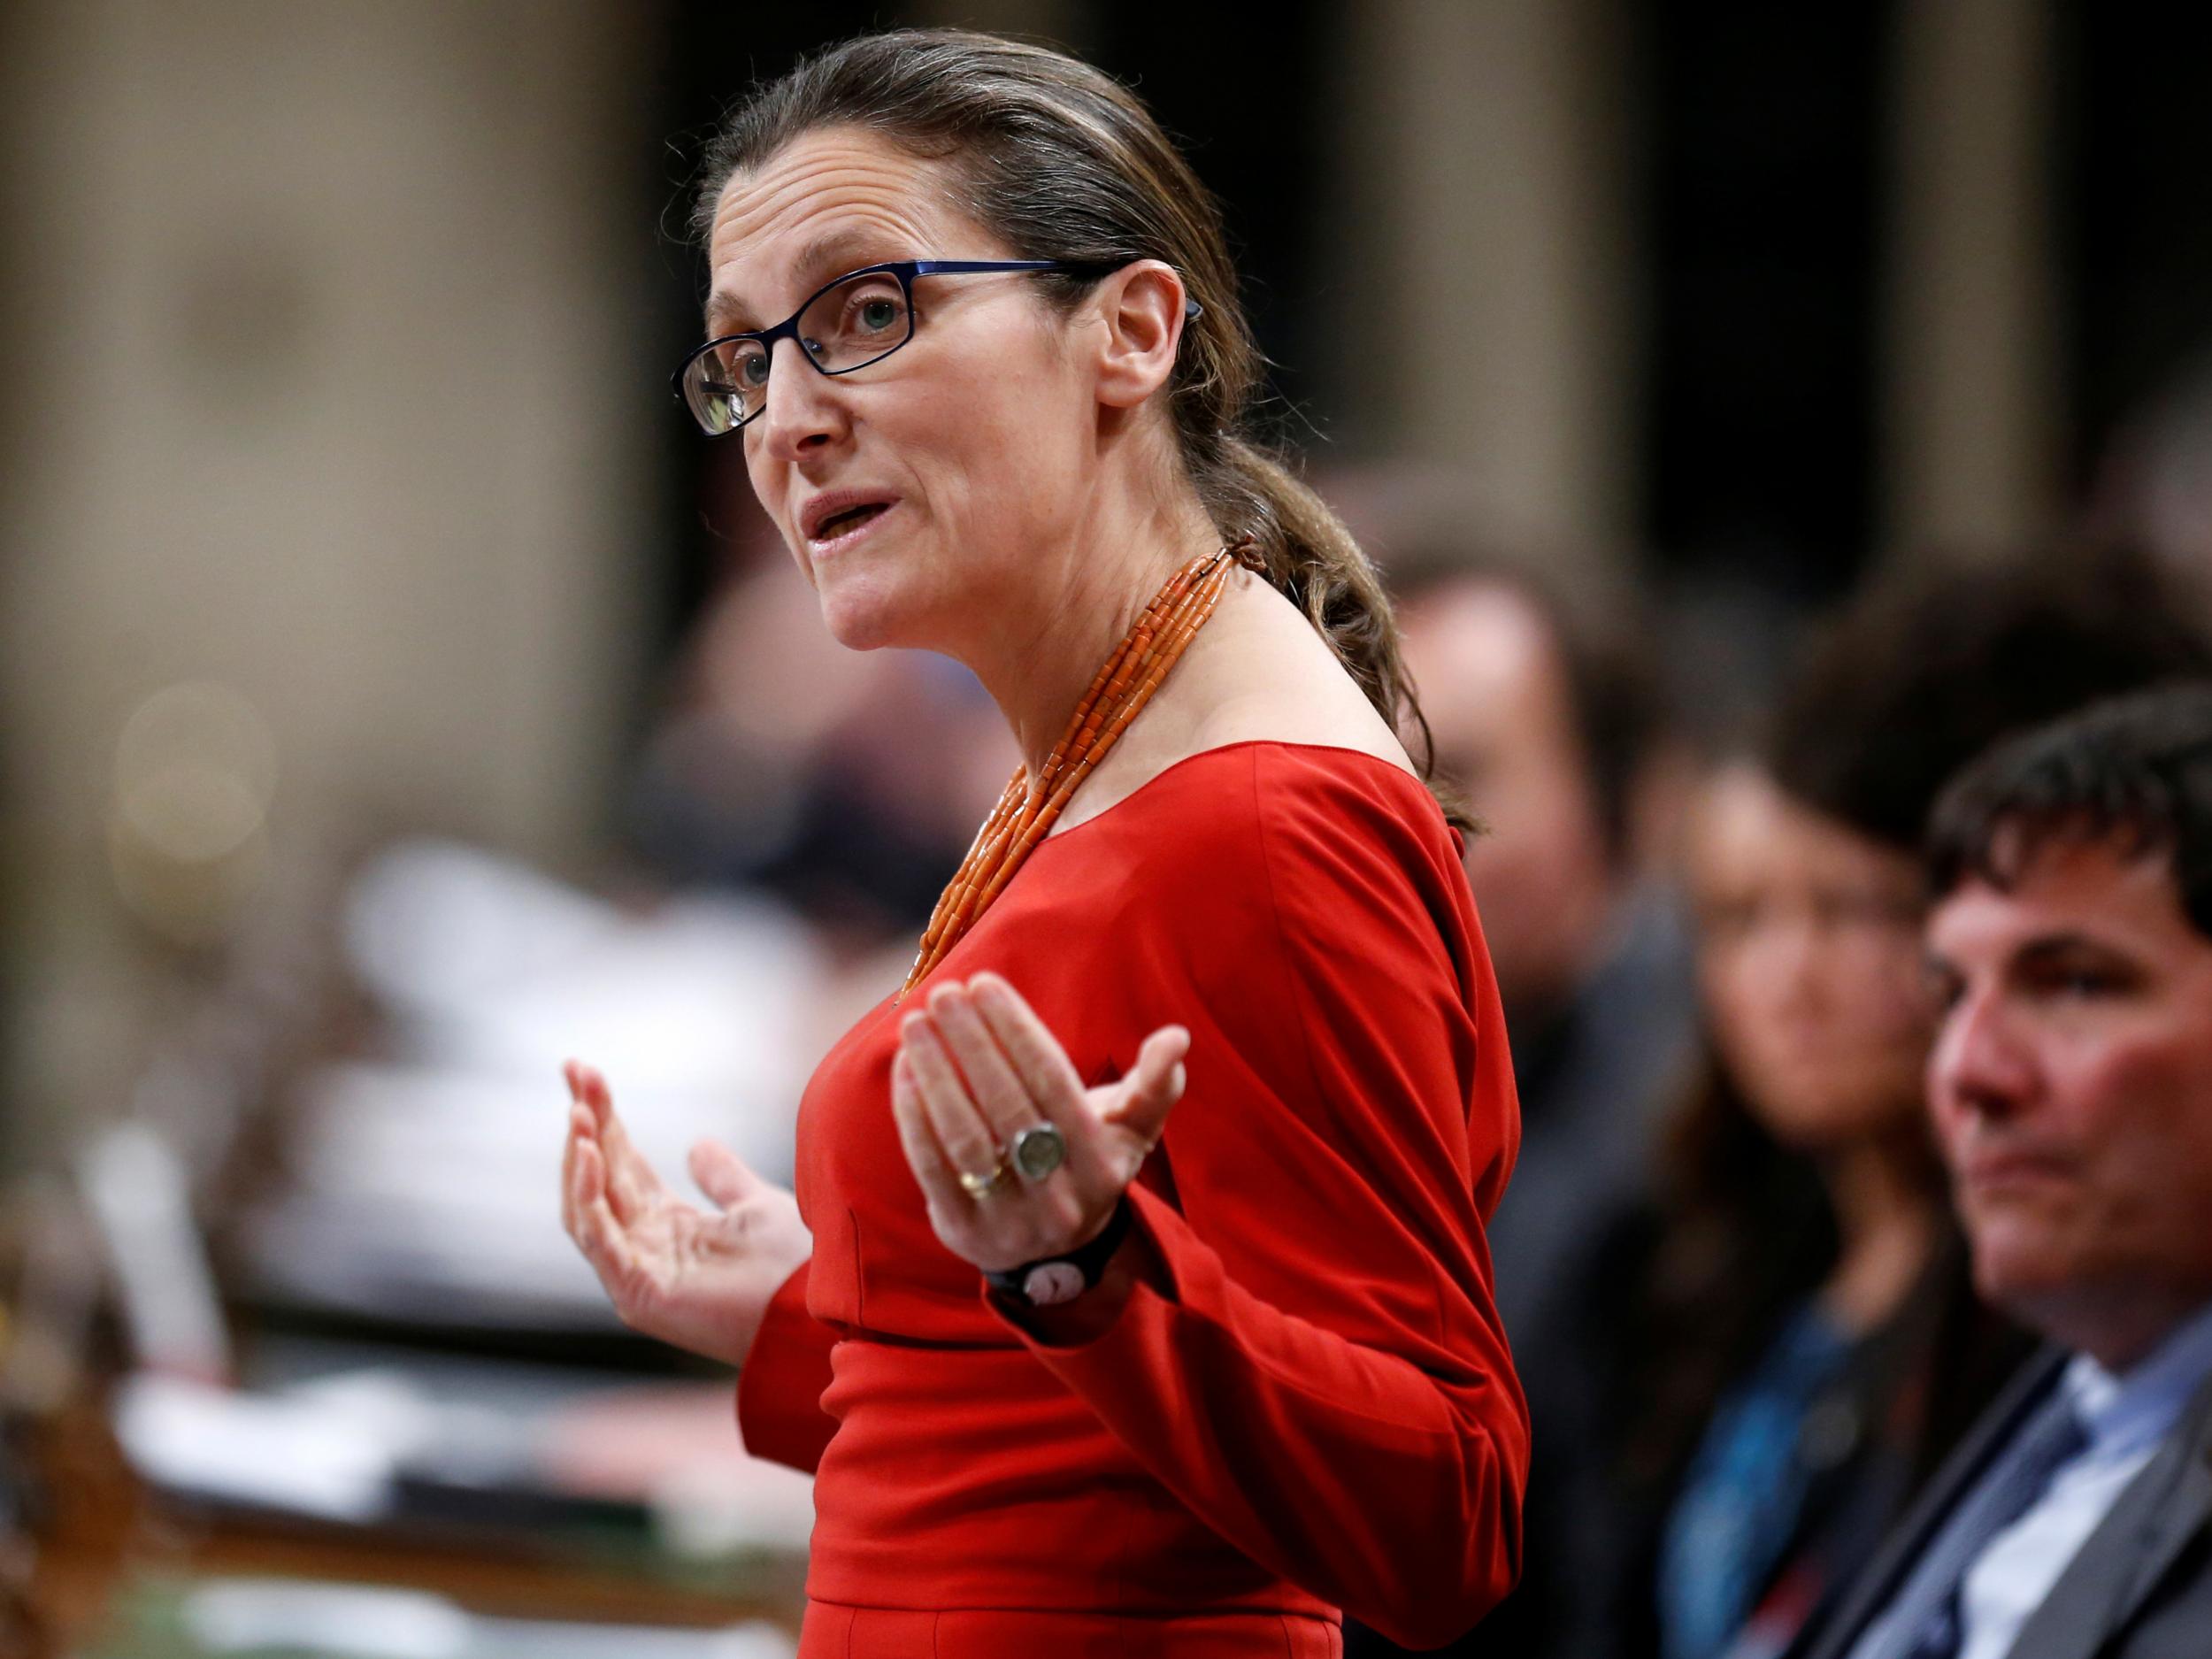 Canada's Foreign Minister Chrystia Freeland speaks during Question Period in the House of Commons on Parliament Hill in Ottawa, Ontario